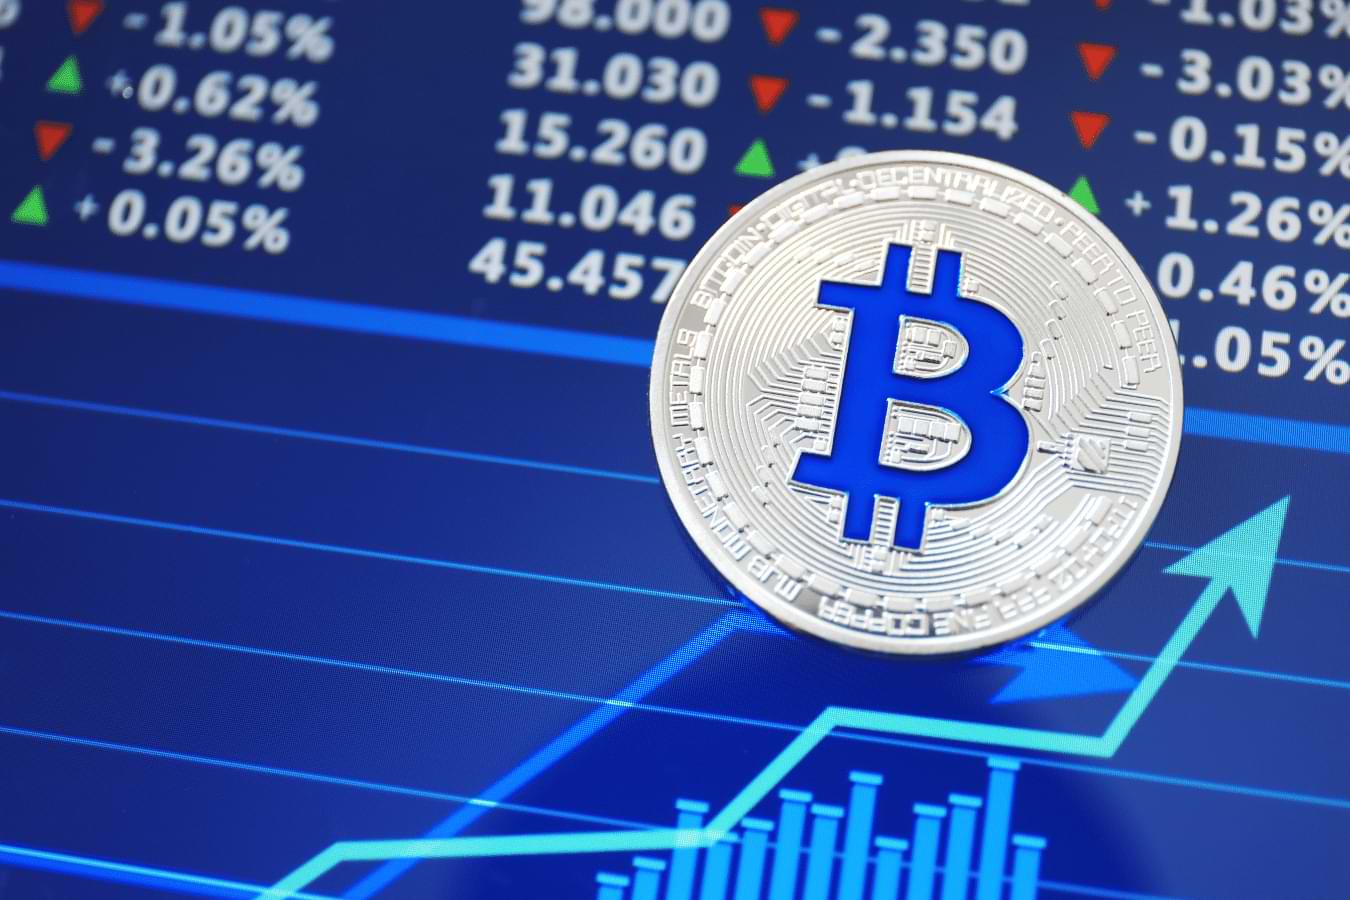 Bitcoin Price Prediction 2021 and Beyond: Will Bitcoin End ...